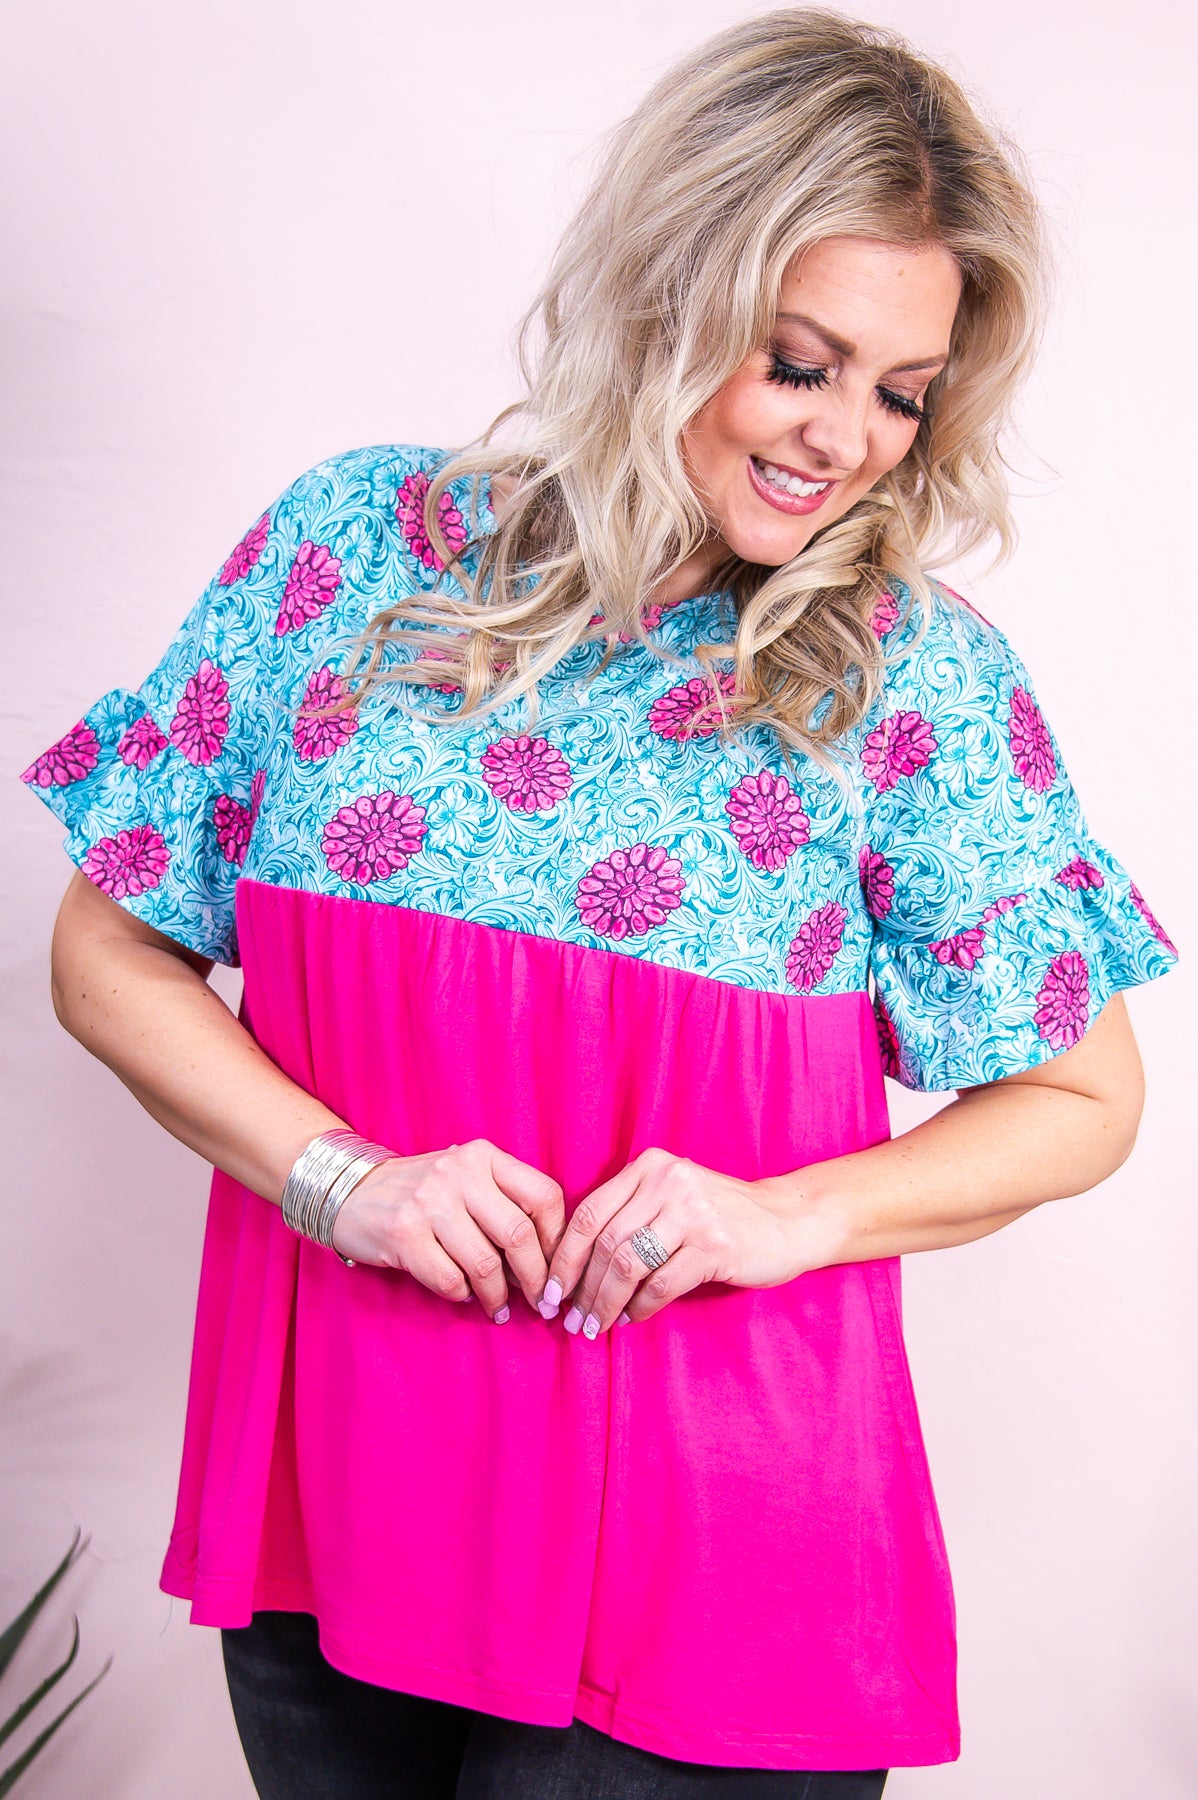 Unstoppable Energy Turquoise/Fuchsia Printed Top - T9281TU